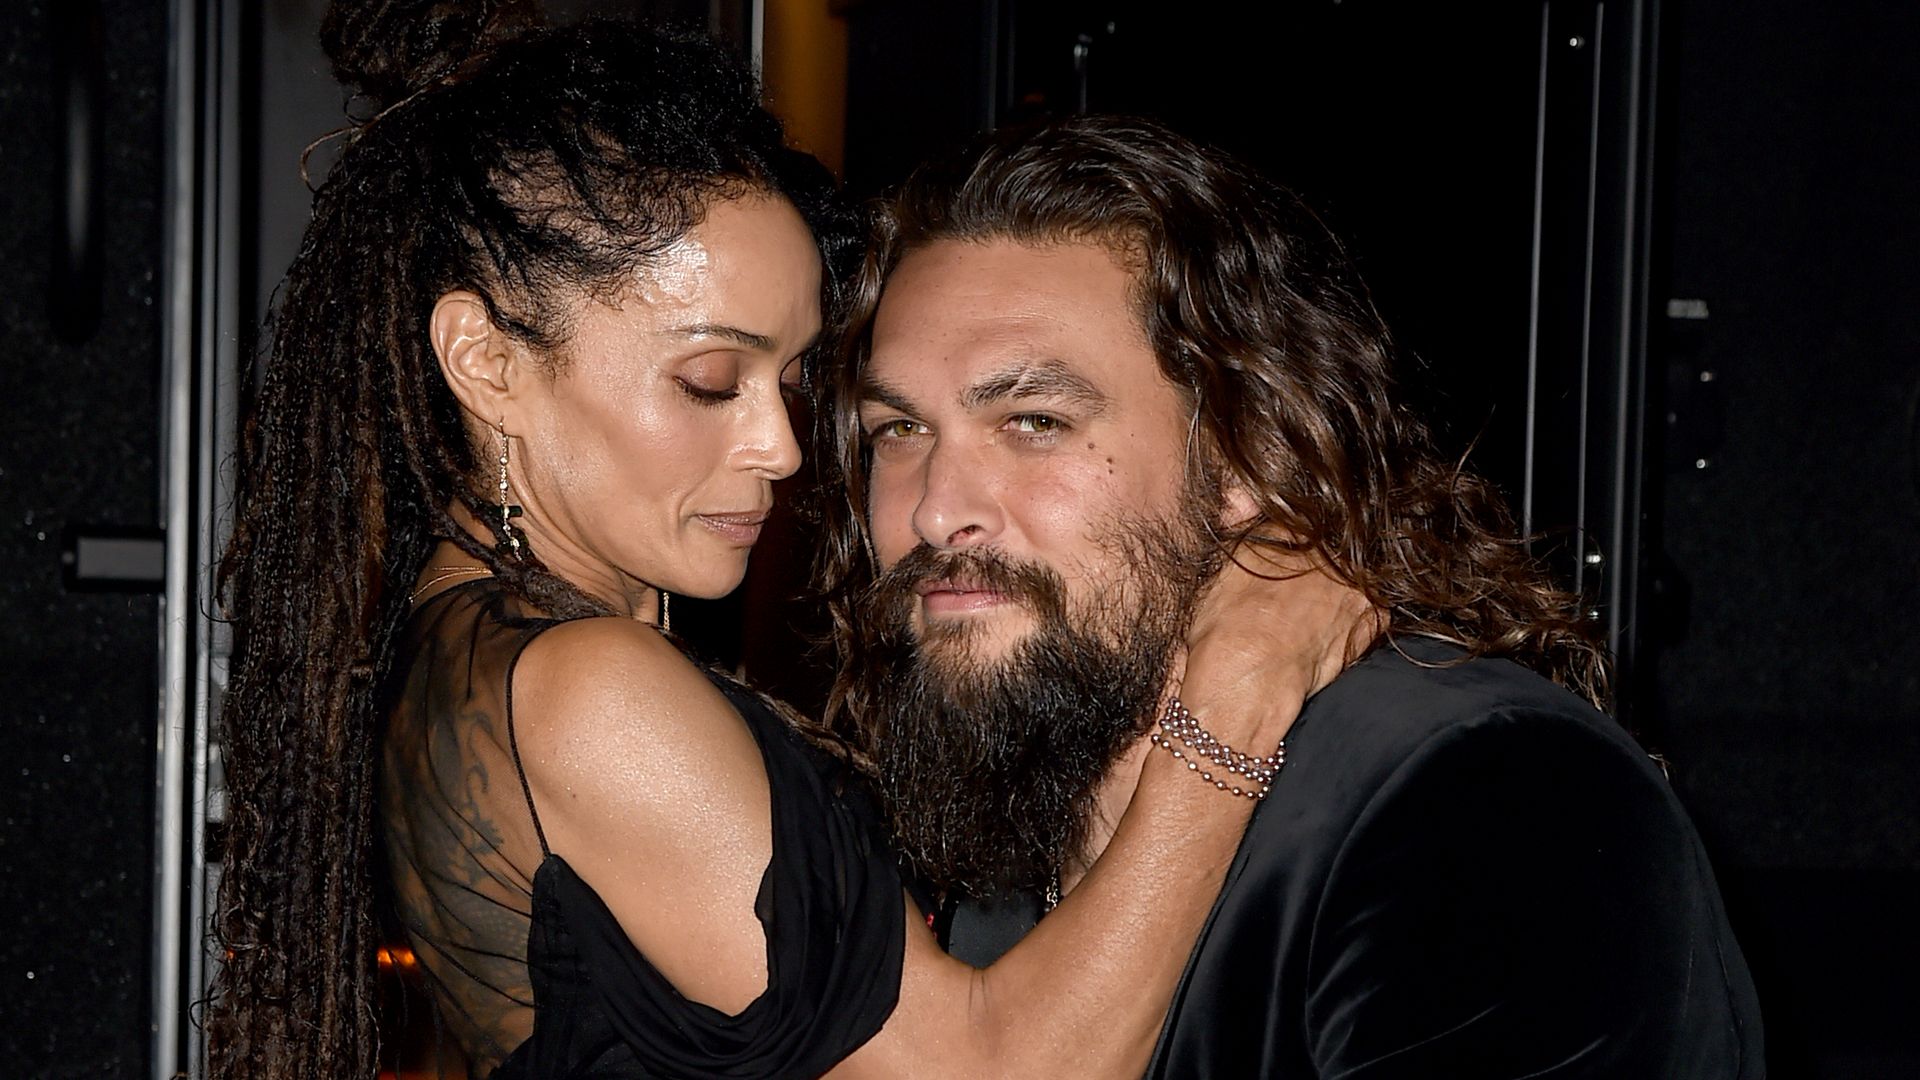 Lisa Bonet and Jason Momoa attend the premiere of Warner Bros. Pictures' "Aquaman" at TCL Chinese Theatre on December 12, 2018 in Hollywood, California.